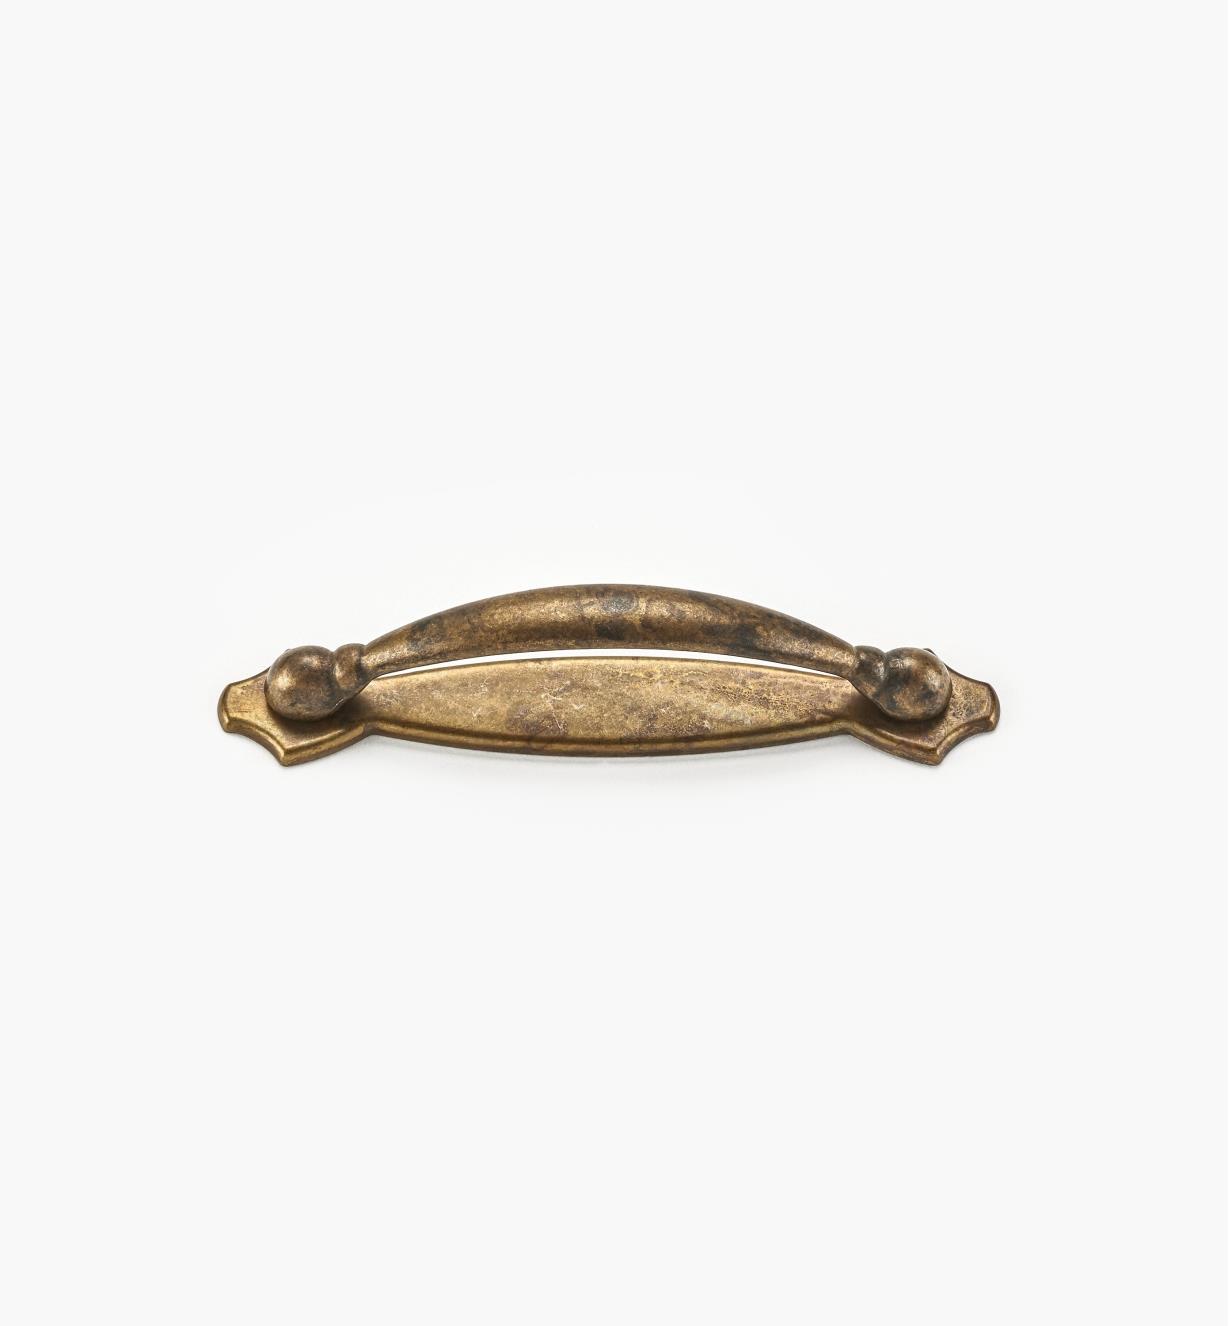 00A2932 - 96mm Old Brass Plated Handle